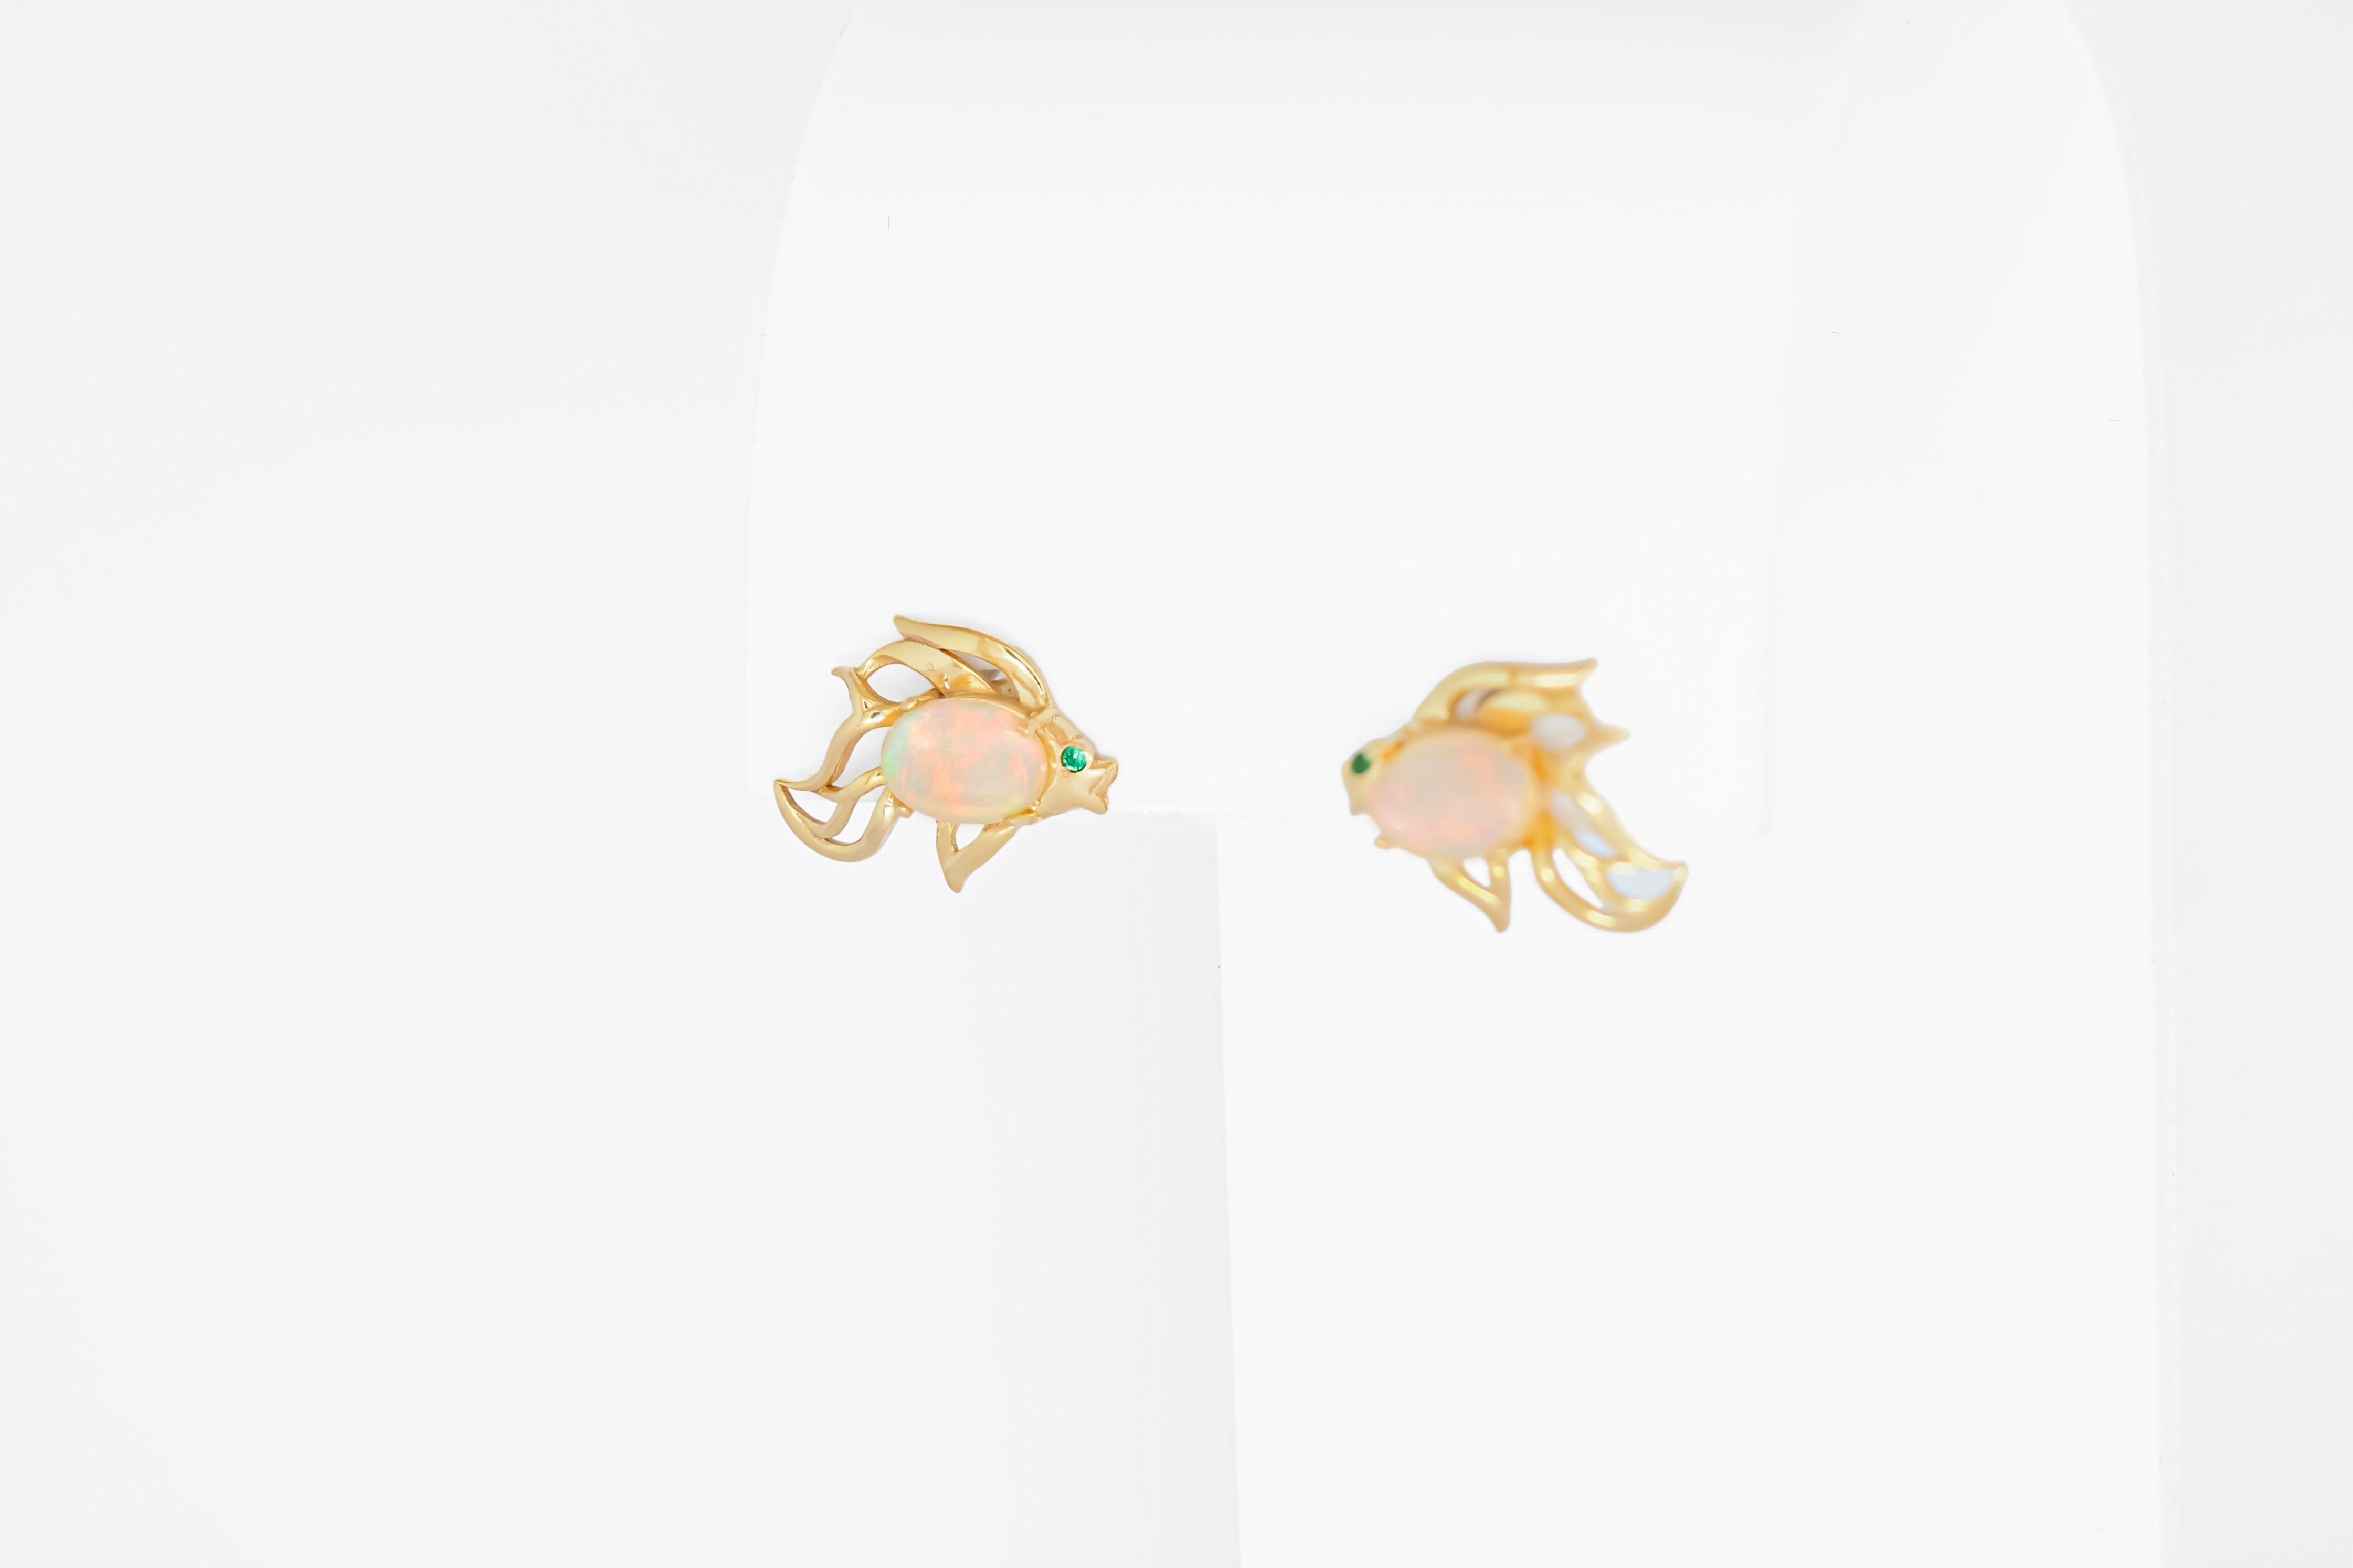 Cabochon 14k gold Fish pendant and earrings set in 14k gold.  For Sale